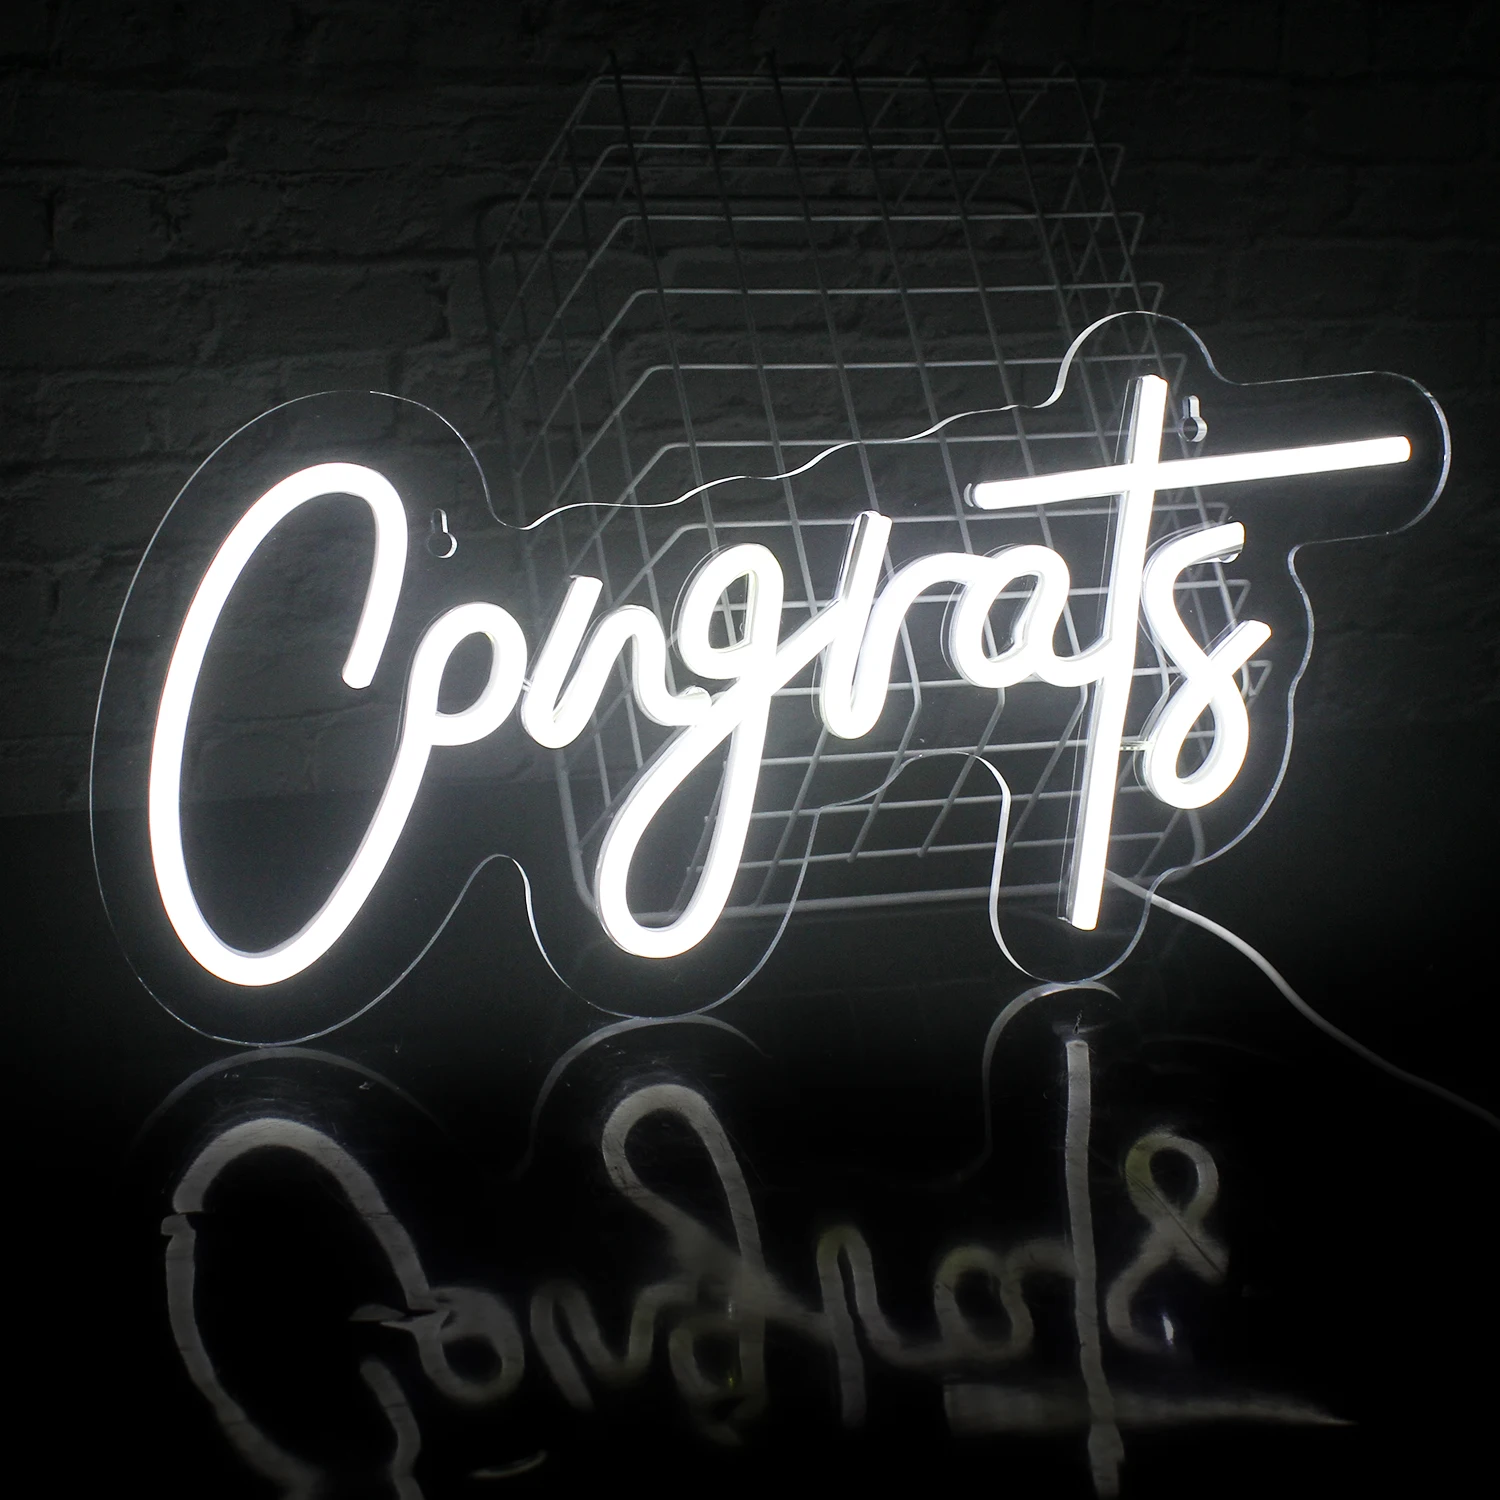 Congrats Neon Sign USB Powered Acrylic LED Wedding Birthday Party Celebrate Office BAR Child Room Bedroom Wall Decor Lamp Gift